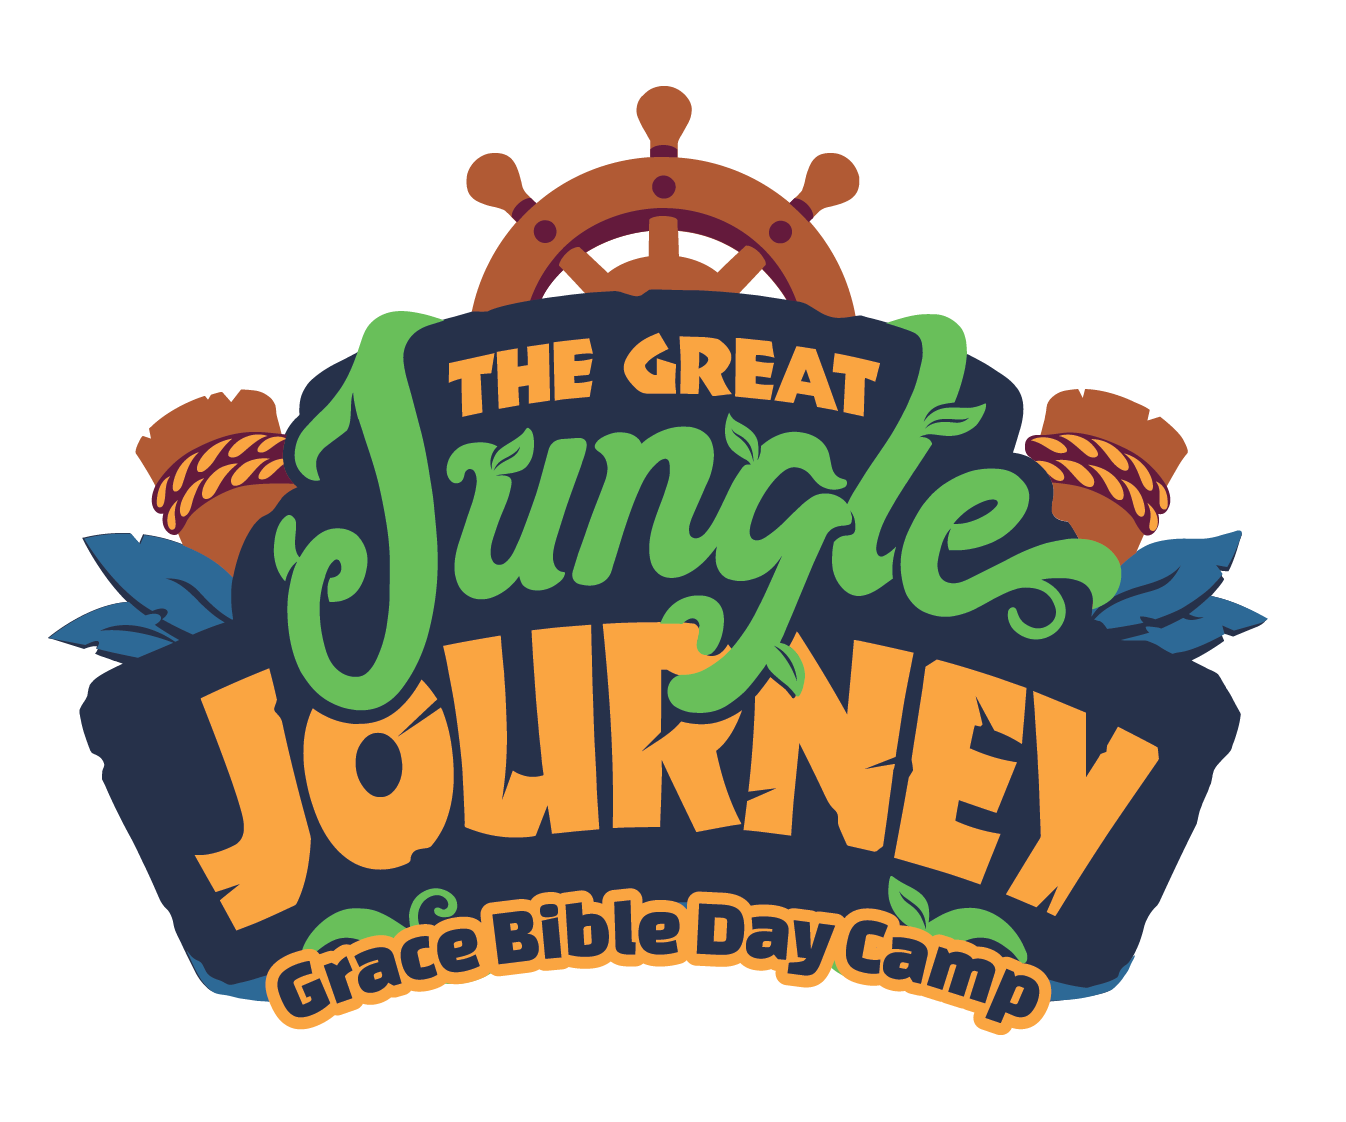 Grace Bible Day Camp